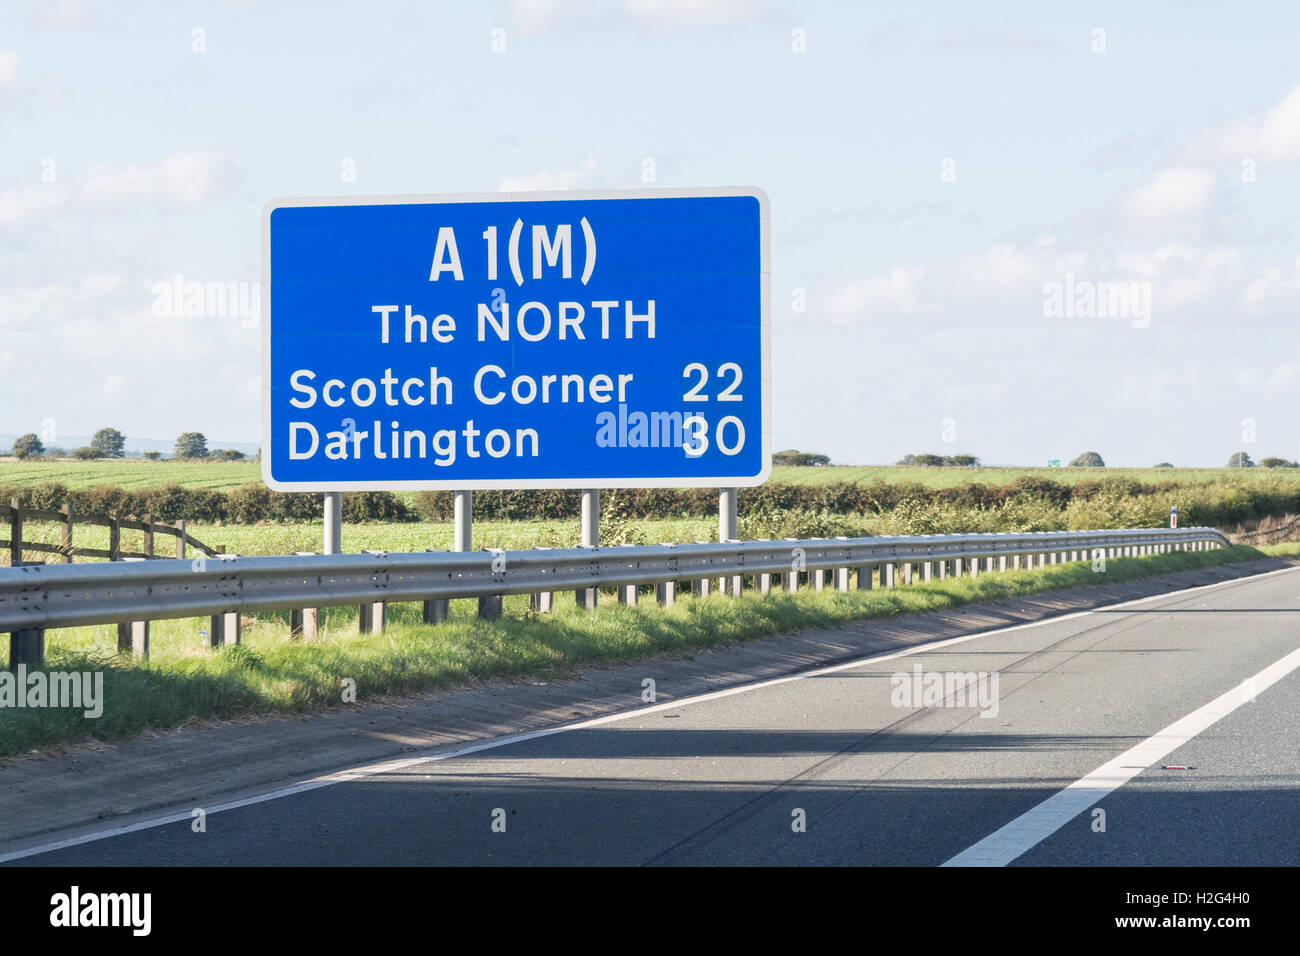 The North motorway sign on the A1(M) uk motorway Stock Photo